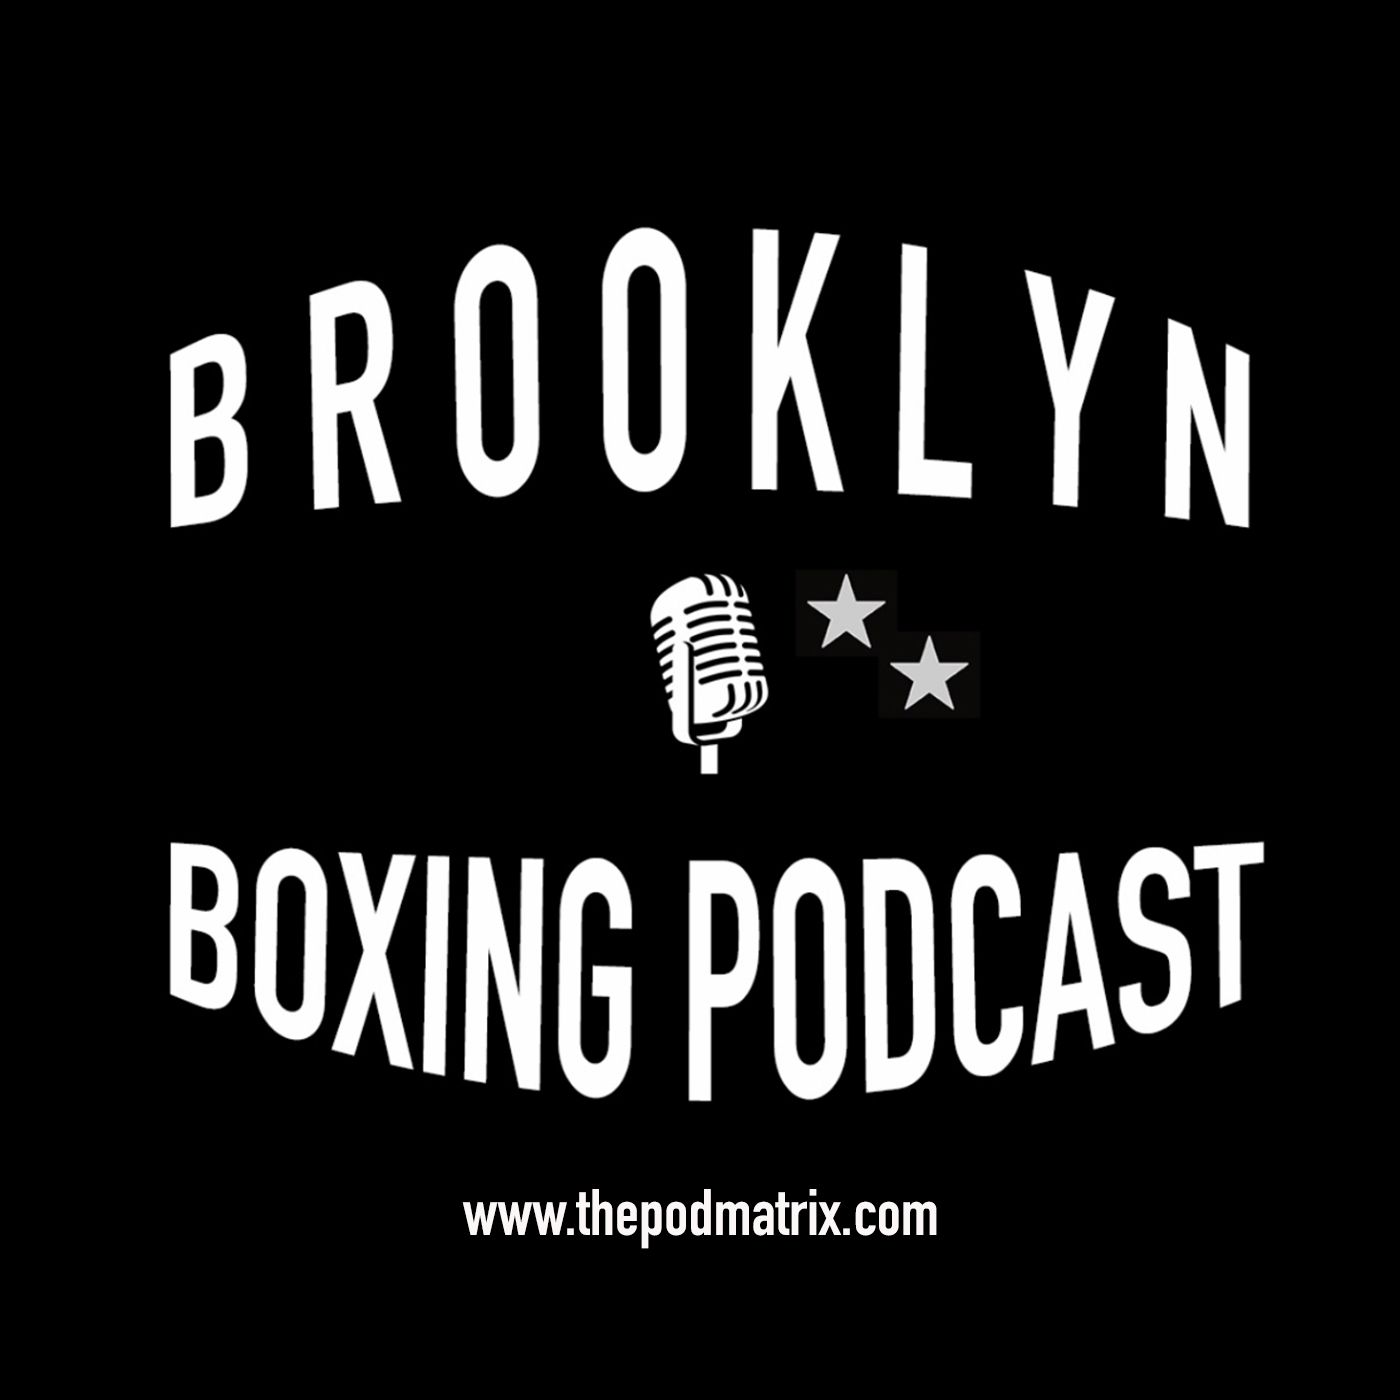 Artwork for podcast BROOKLYN BOXING PODCAST